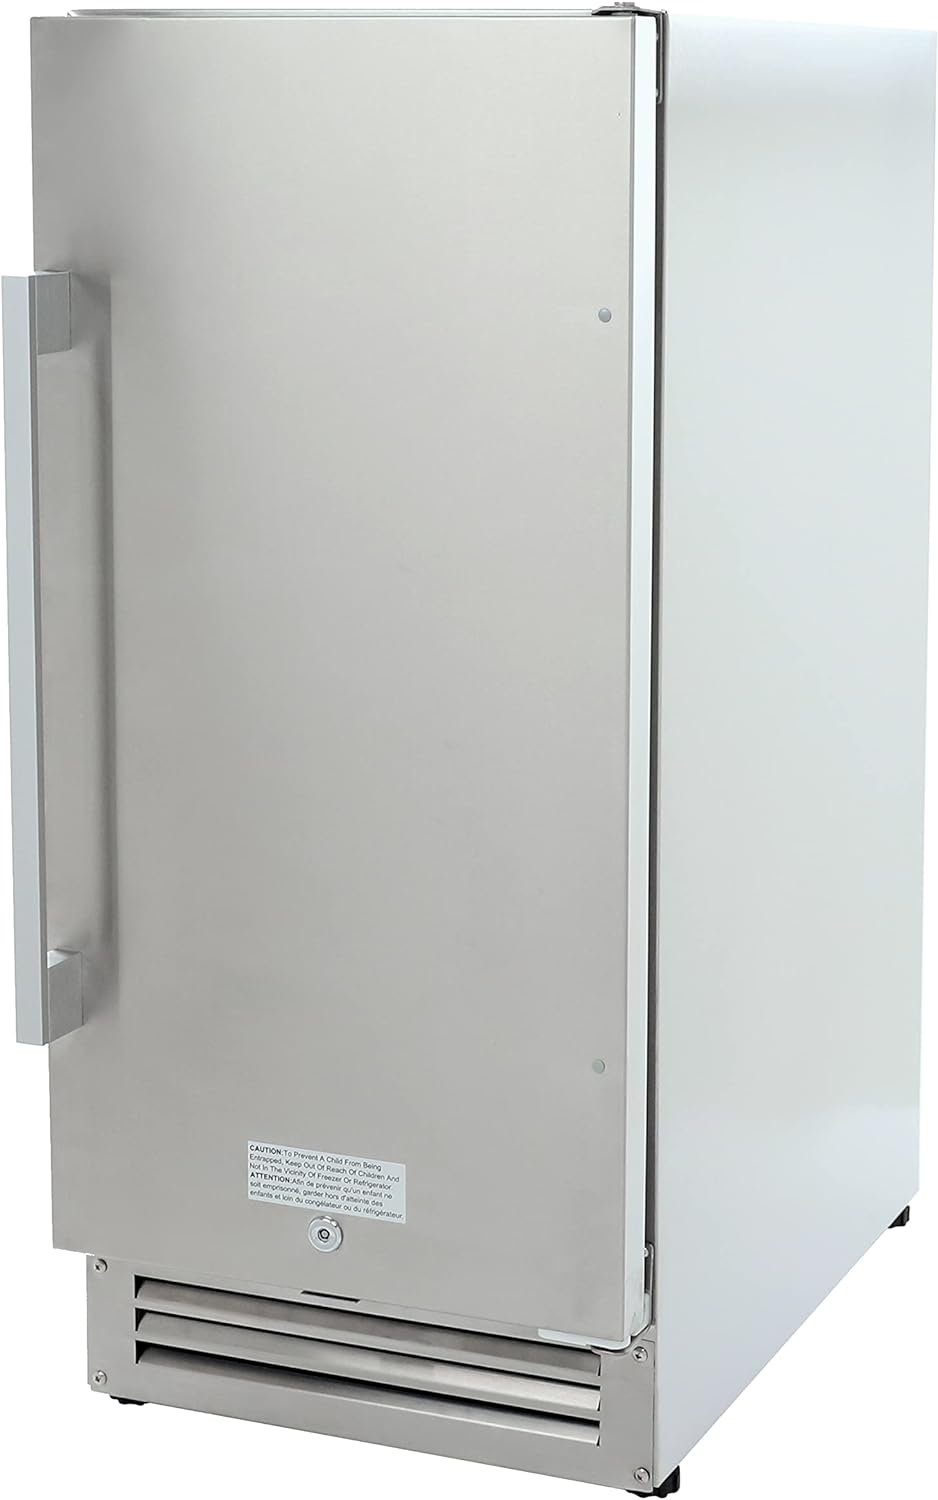 Duura ELITE Series Outdoor Refrigerator in Stainless Steel OR1533U3S | 2.9 cu. ft. Holds 96 Cans, Reversible Door | for Outdoor Kitchens, Patio, Bar, Undercounters, Stays Cool in 100° F